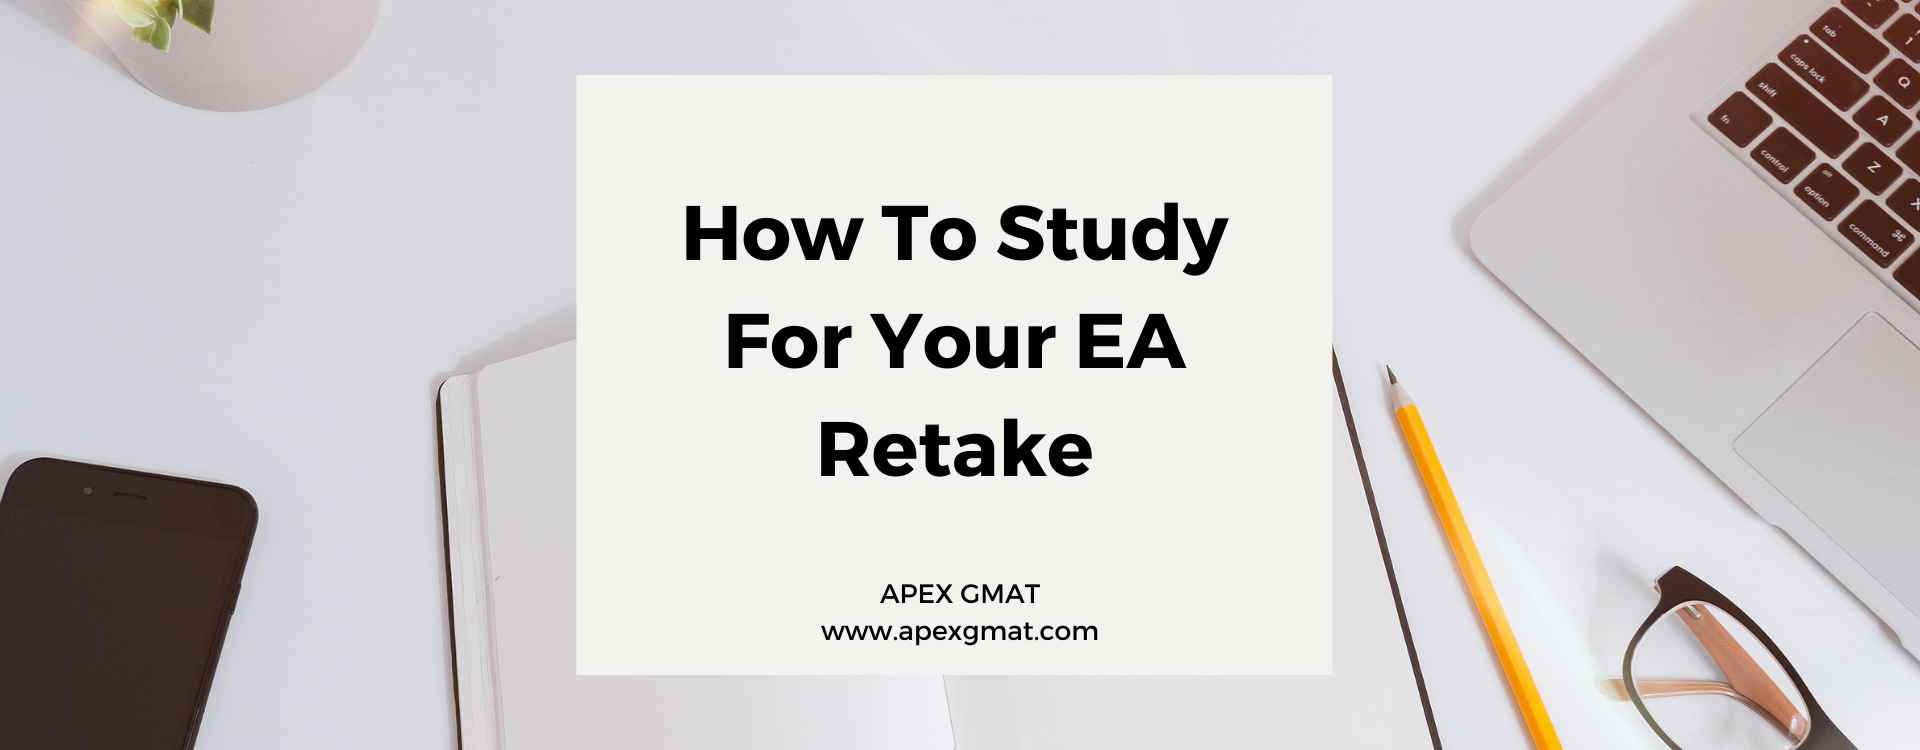 How To Study For Your EA Retake